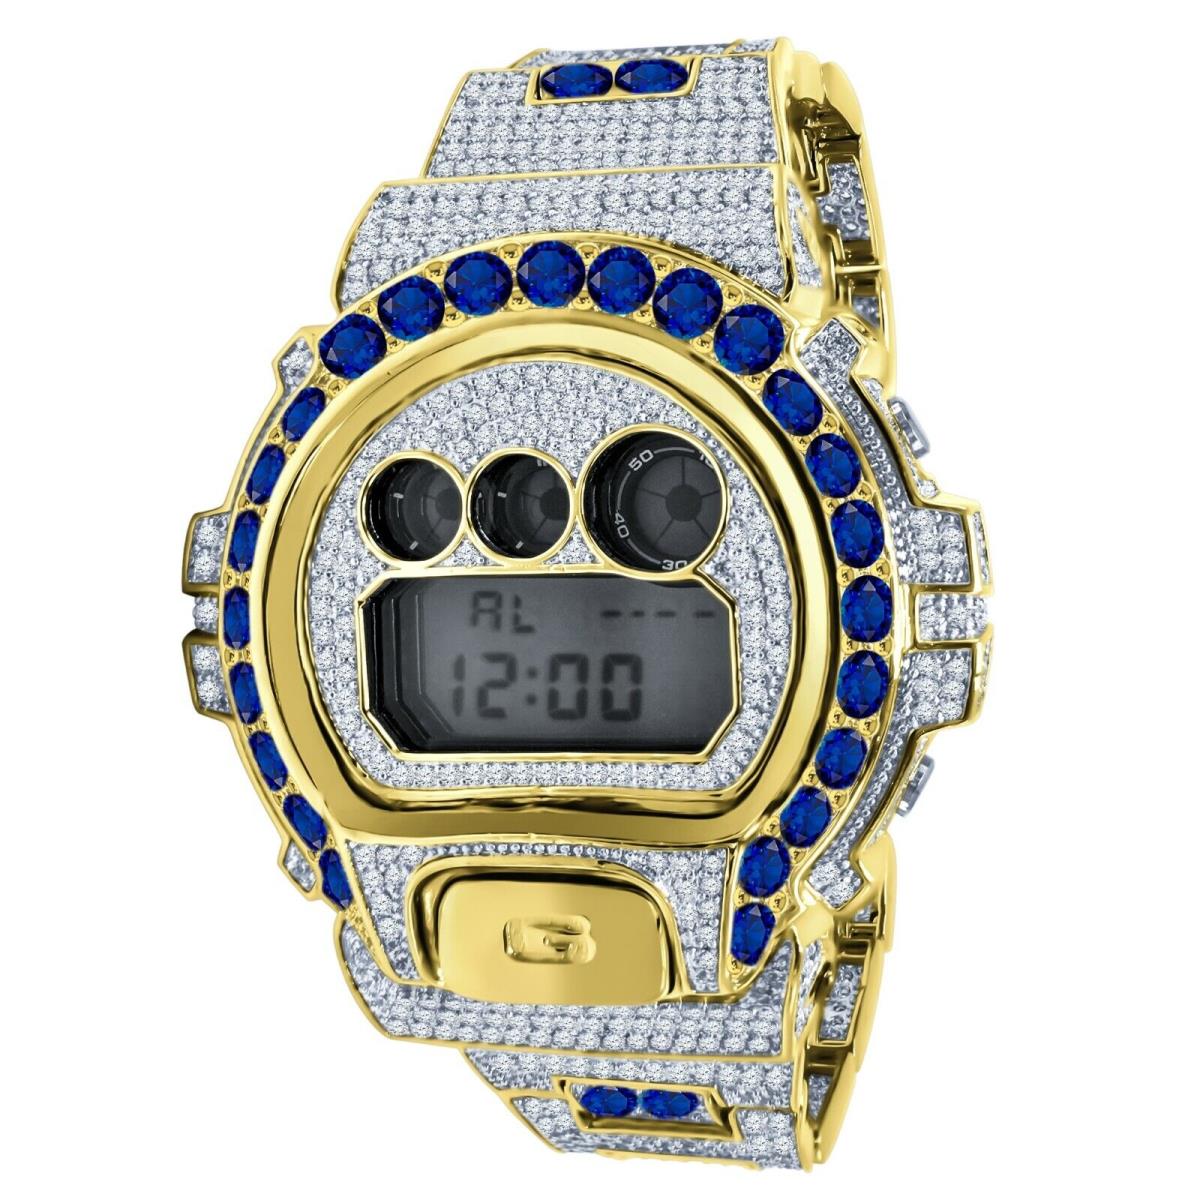 Icy Blue Sapphire Solitaire On Yellow Gold Finish Casio G-shock DW-6900 Watch